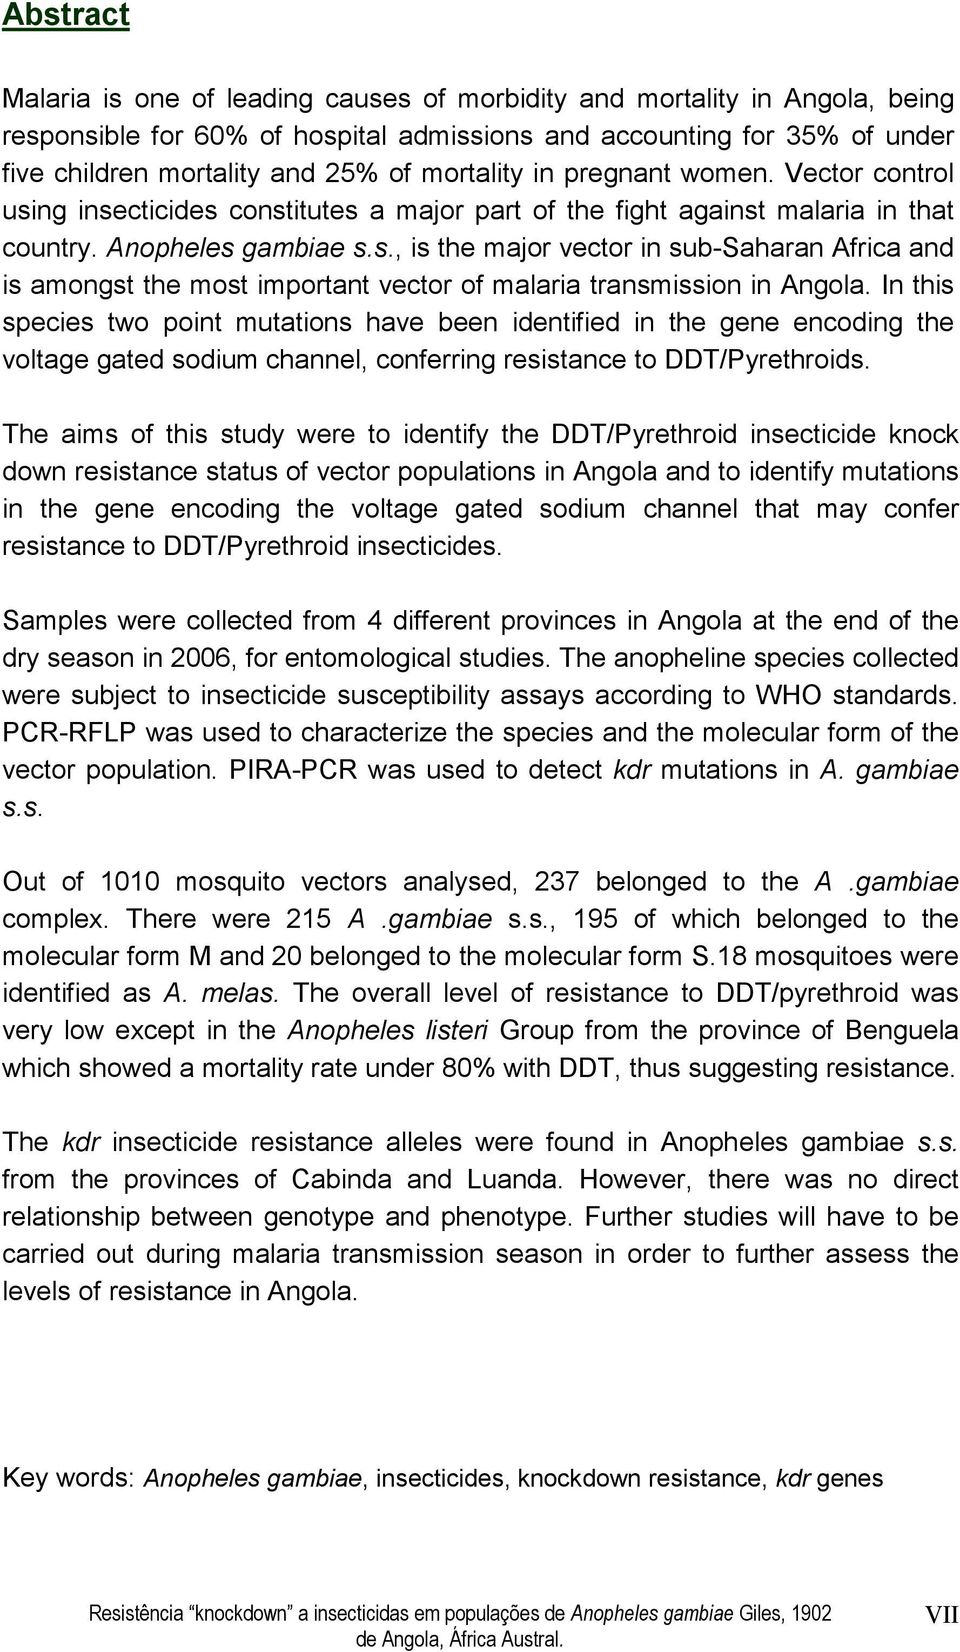 In this species two point mutations have been identified in the gene encoding the voltage gated sodium channel, conferring resistance to DDT/Pyrethroids.